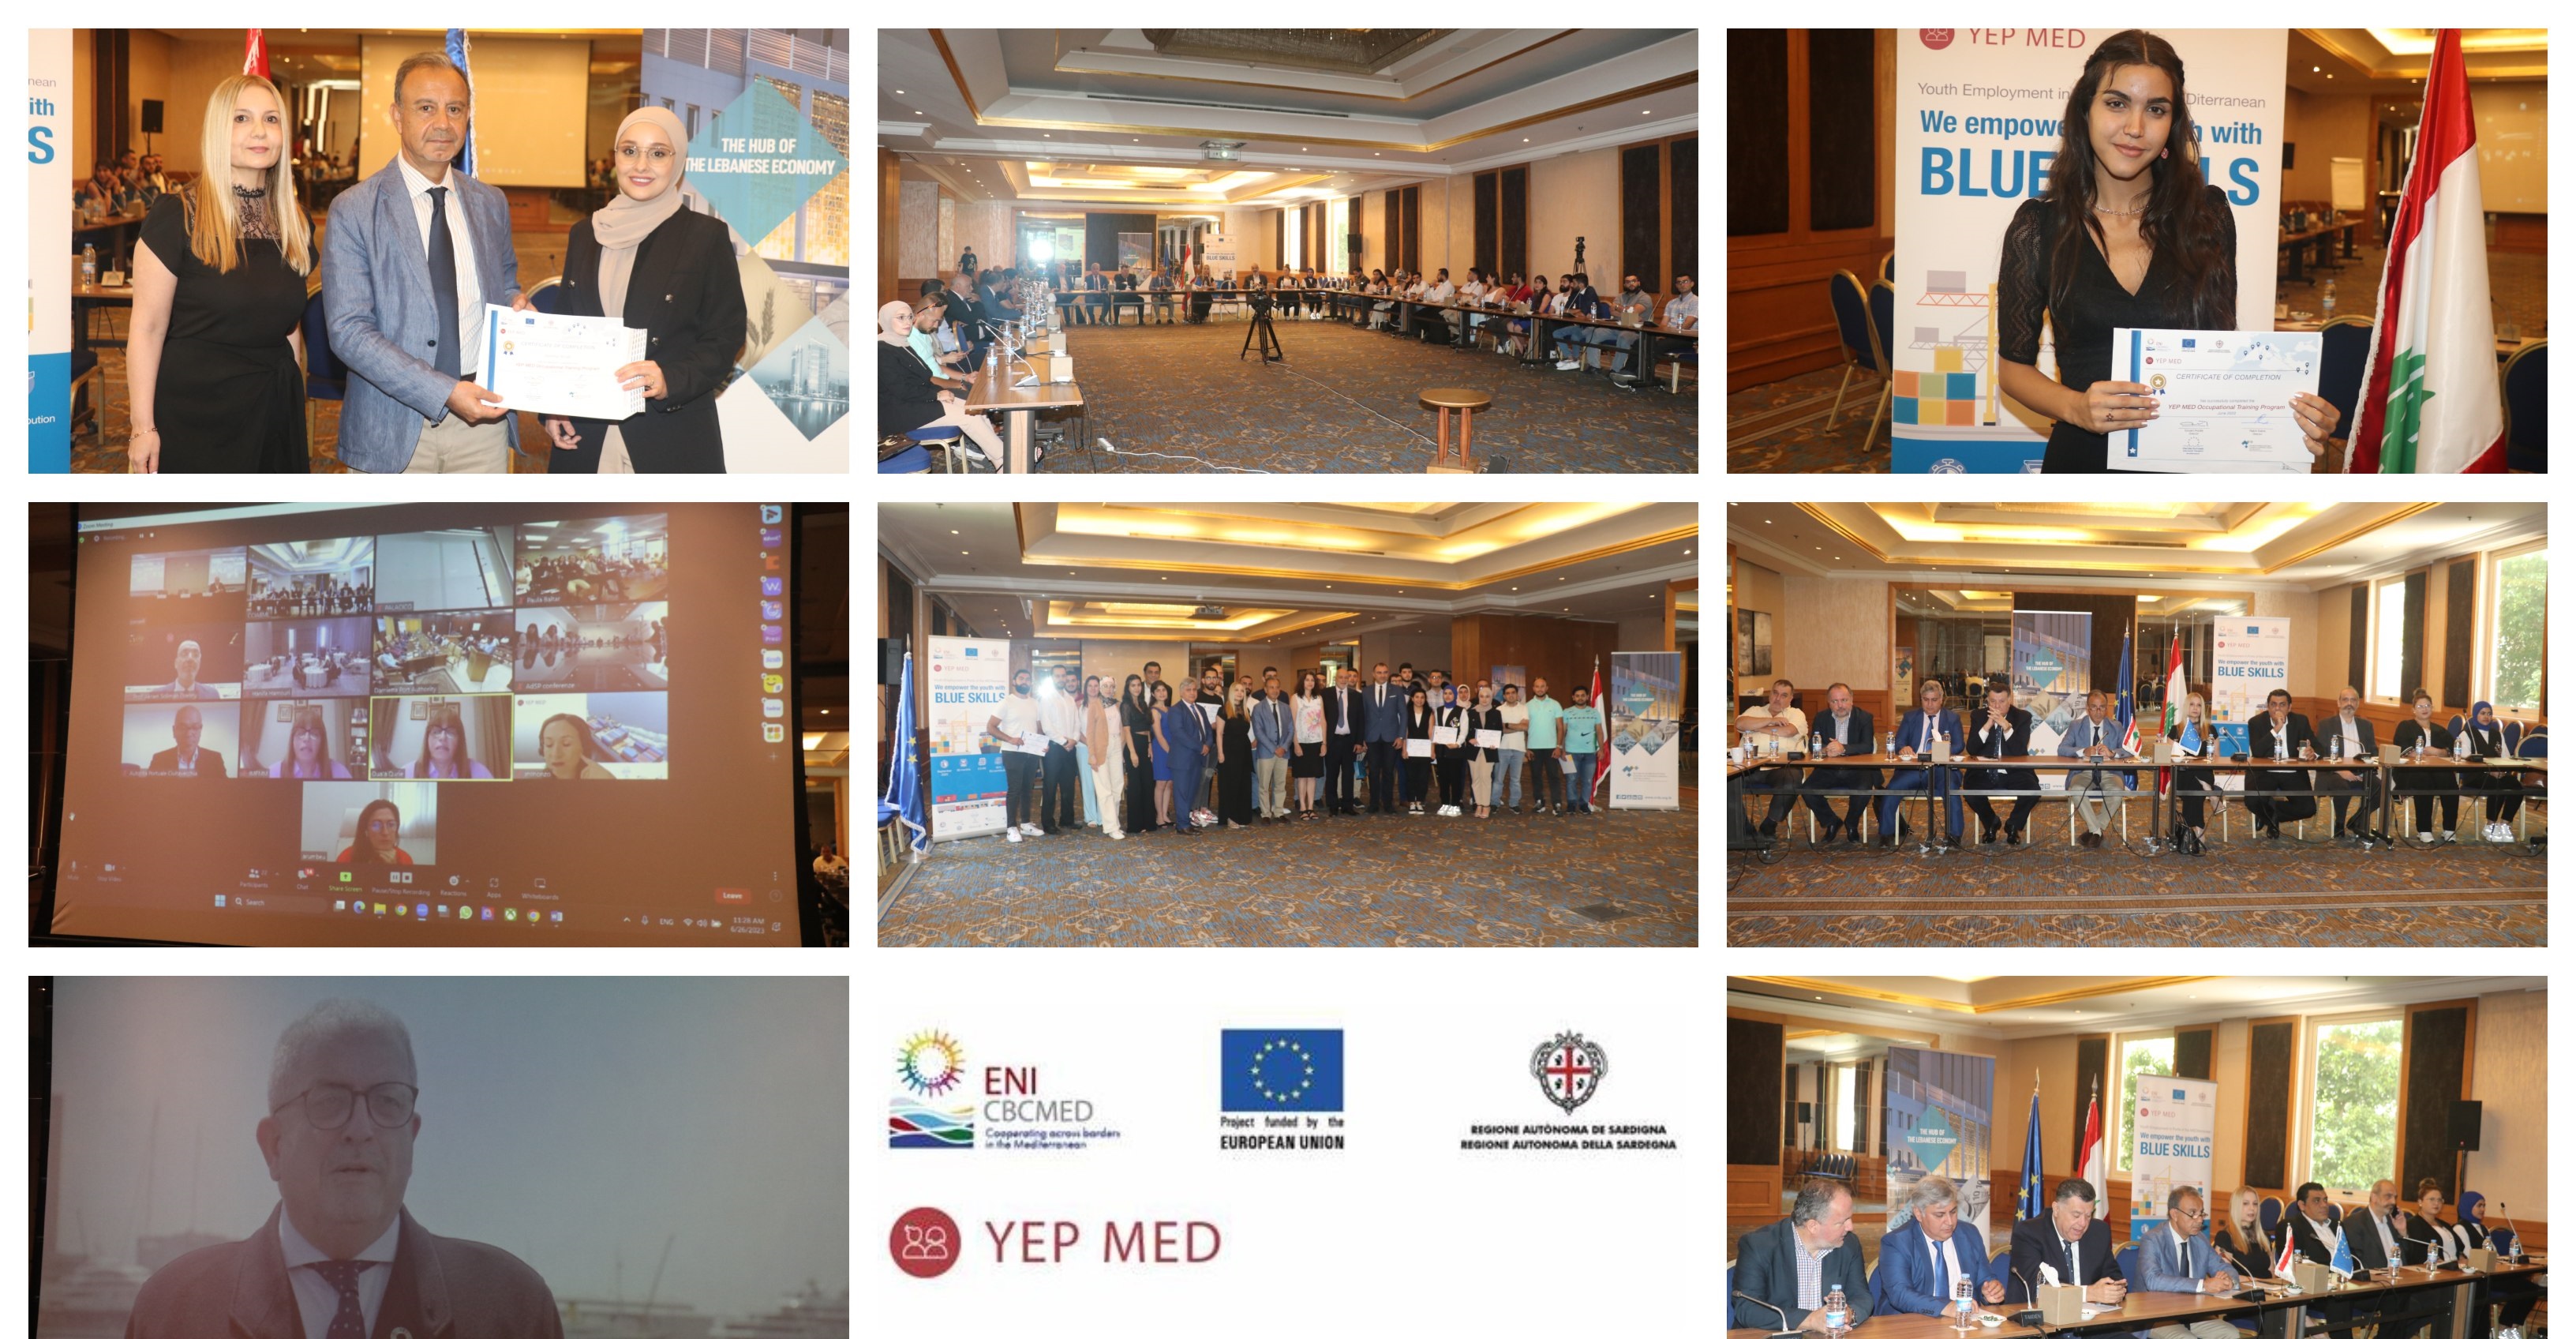 YEP MED local final Event in Beirut: Testimonials and Graduation Ceremony.